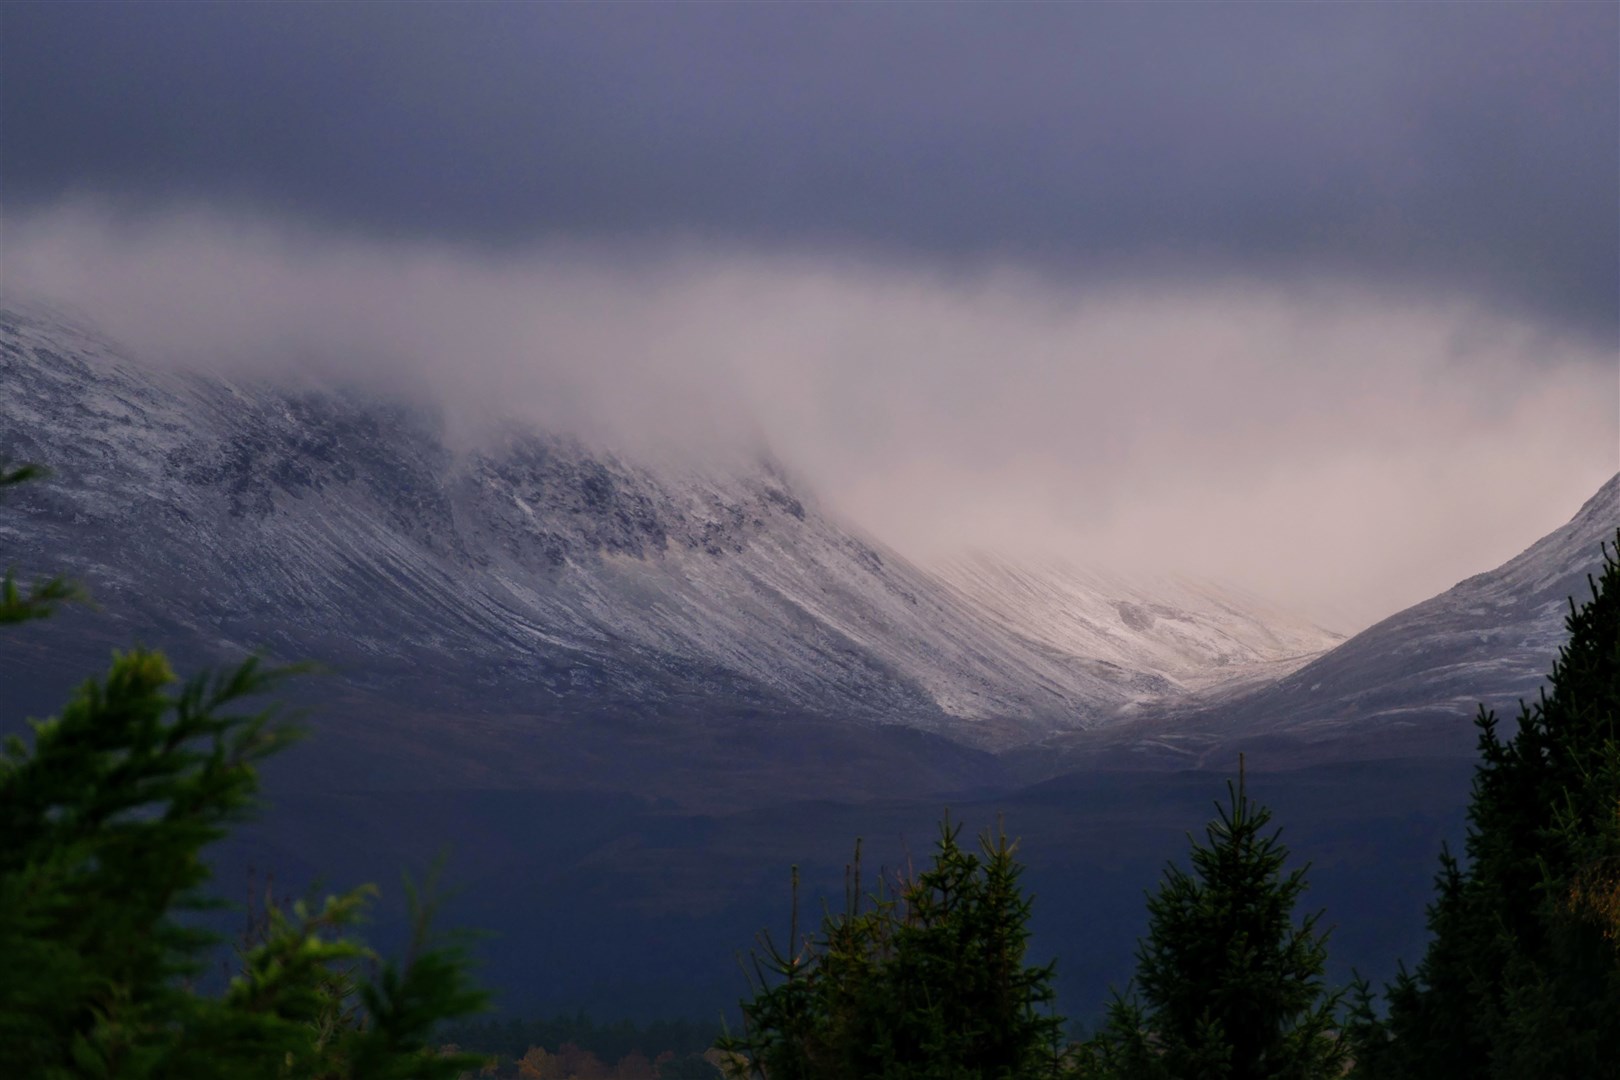 The first snows of the 2019/2020 winter in the Cairngorms were welcomed by many this week. Pic: David MacLeod